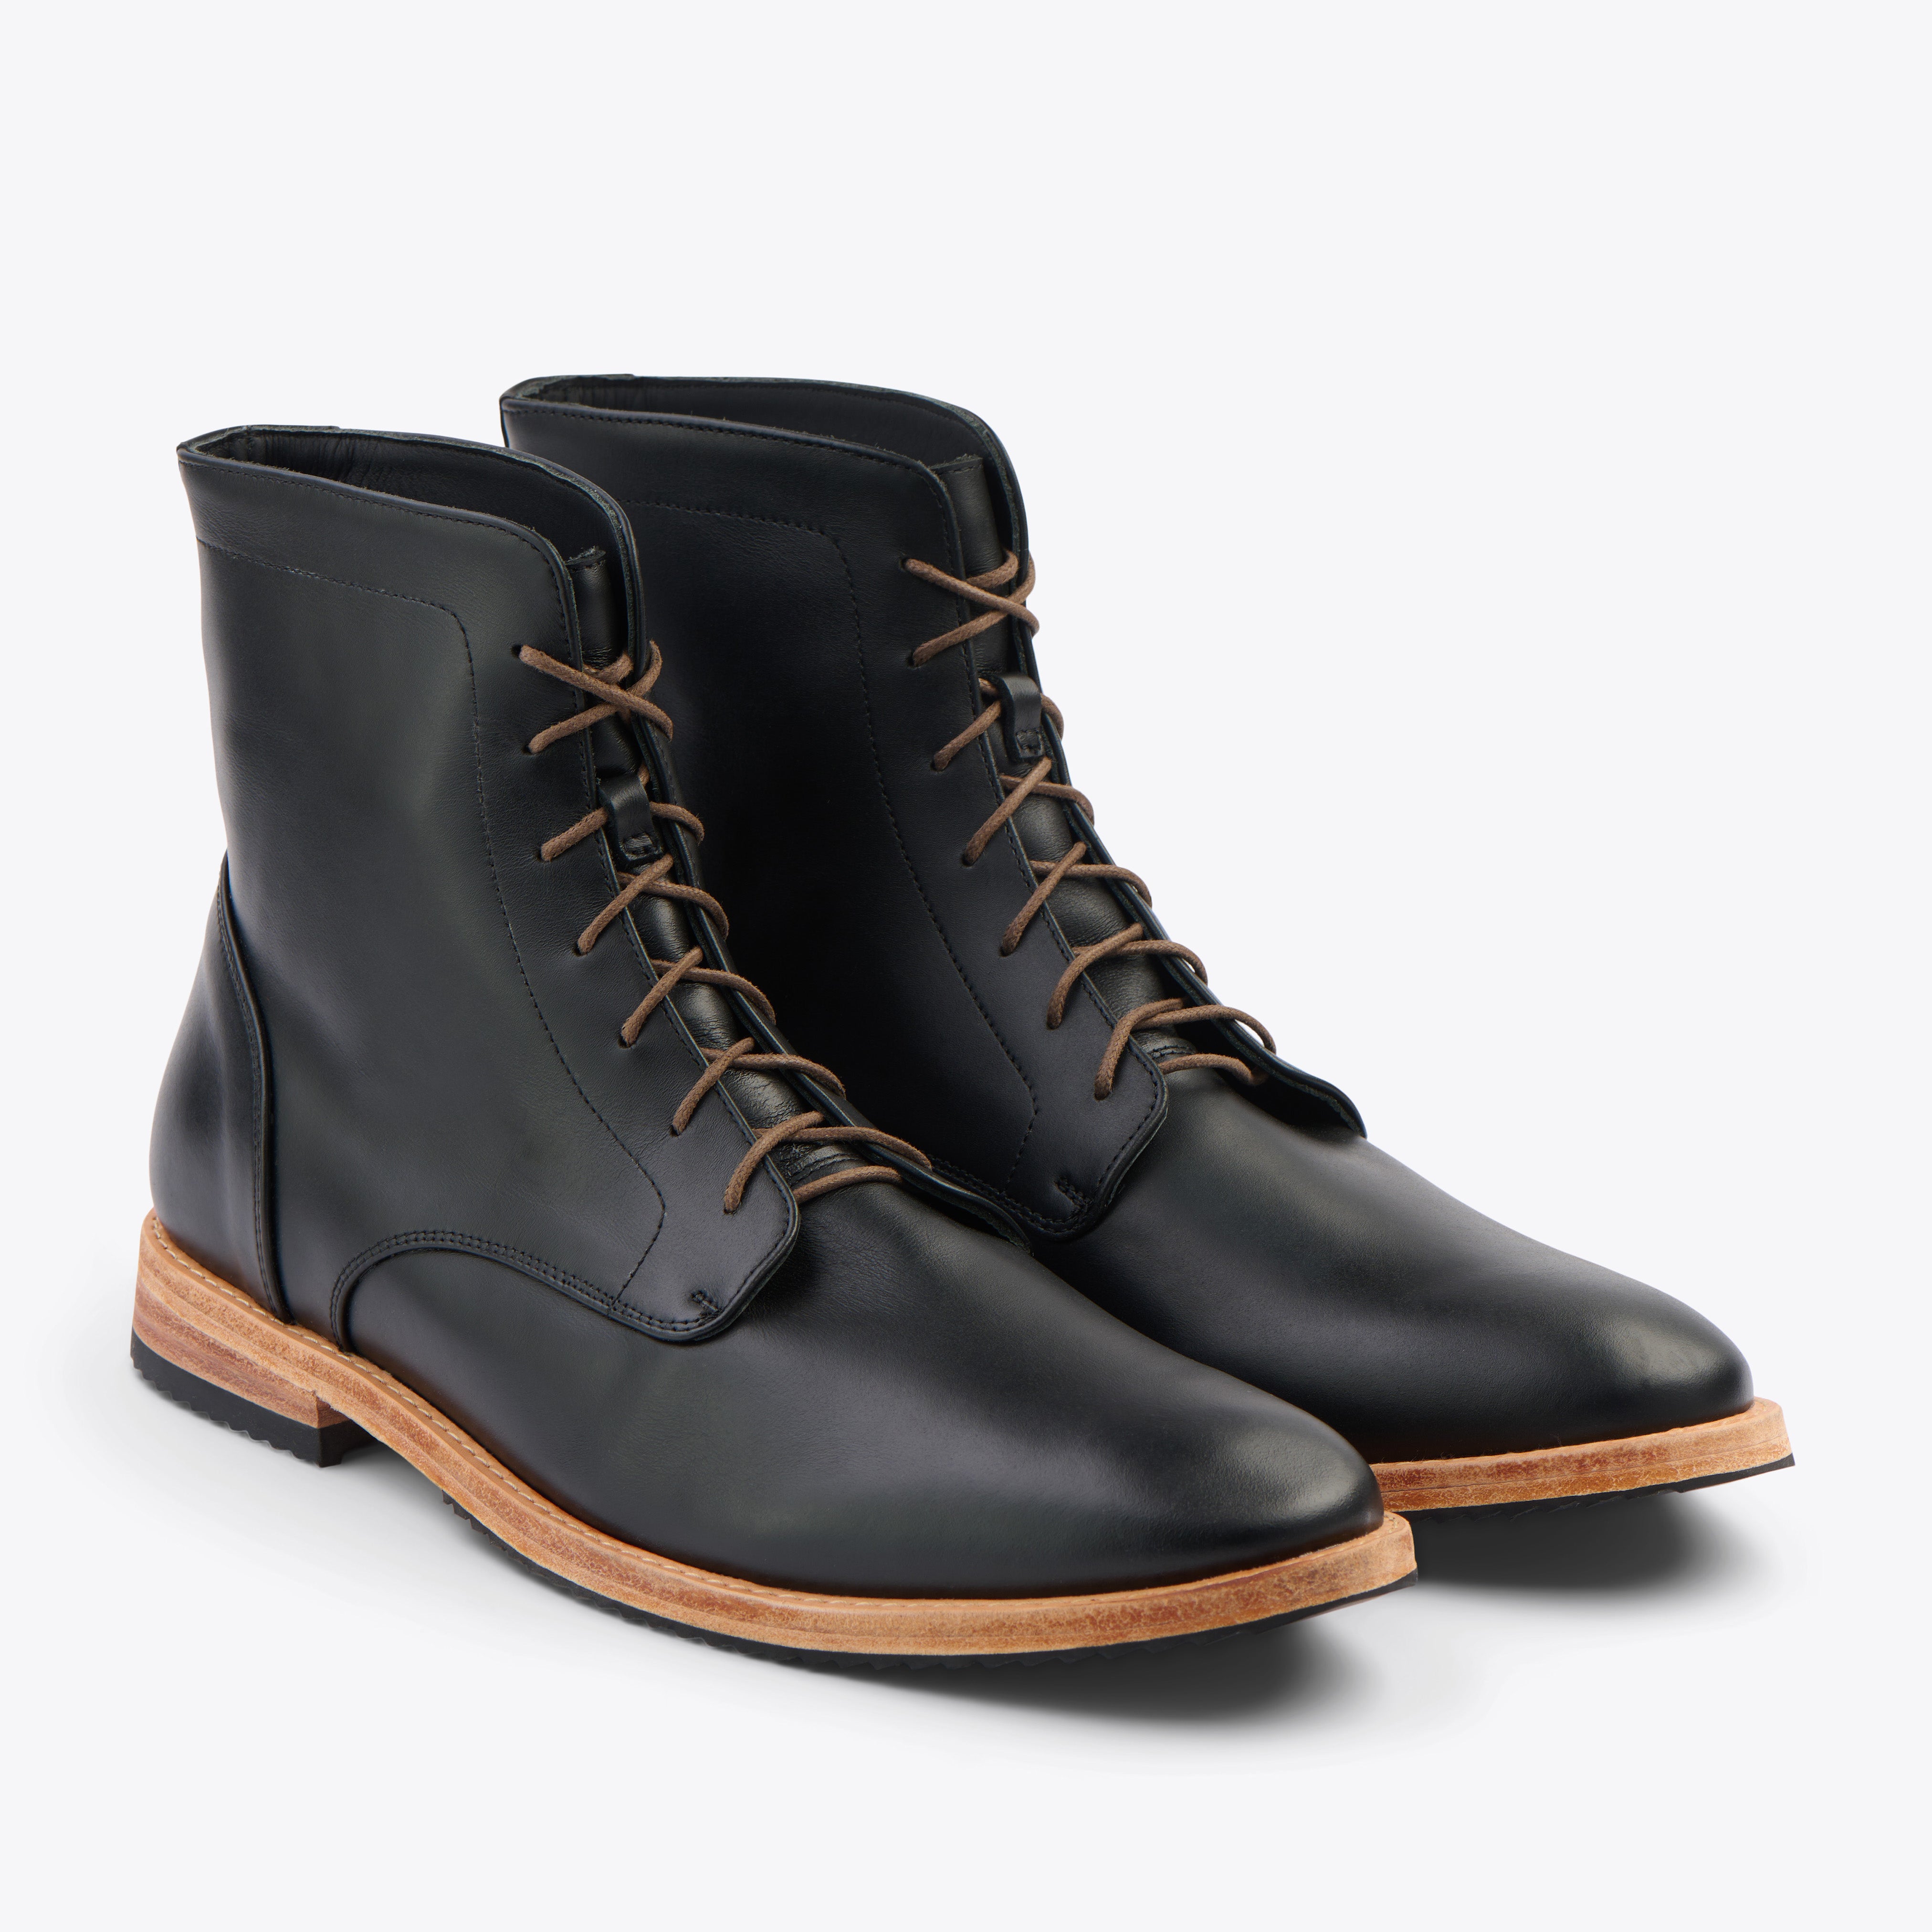 Nisolo Men's Everyday Lace-Up Boot